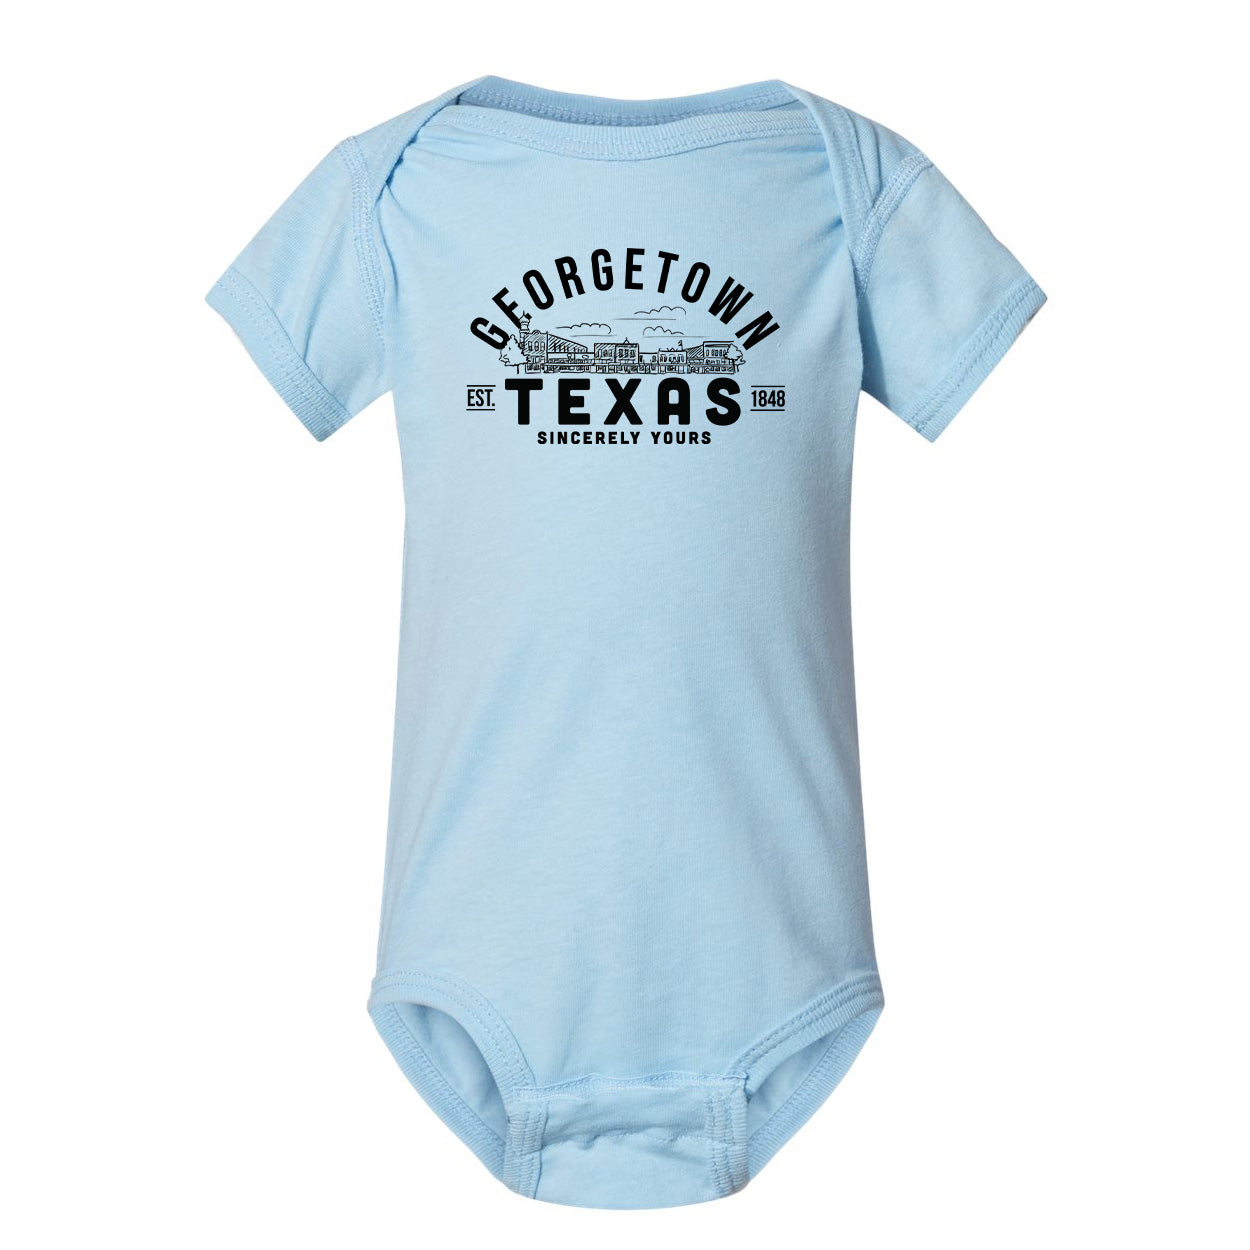 Georgetown Texas Infant Onesie - Town Square